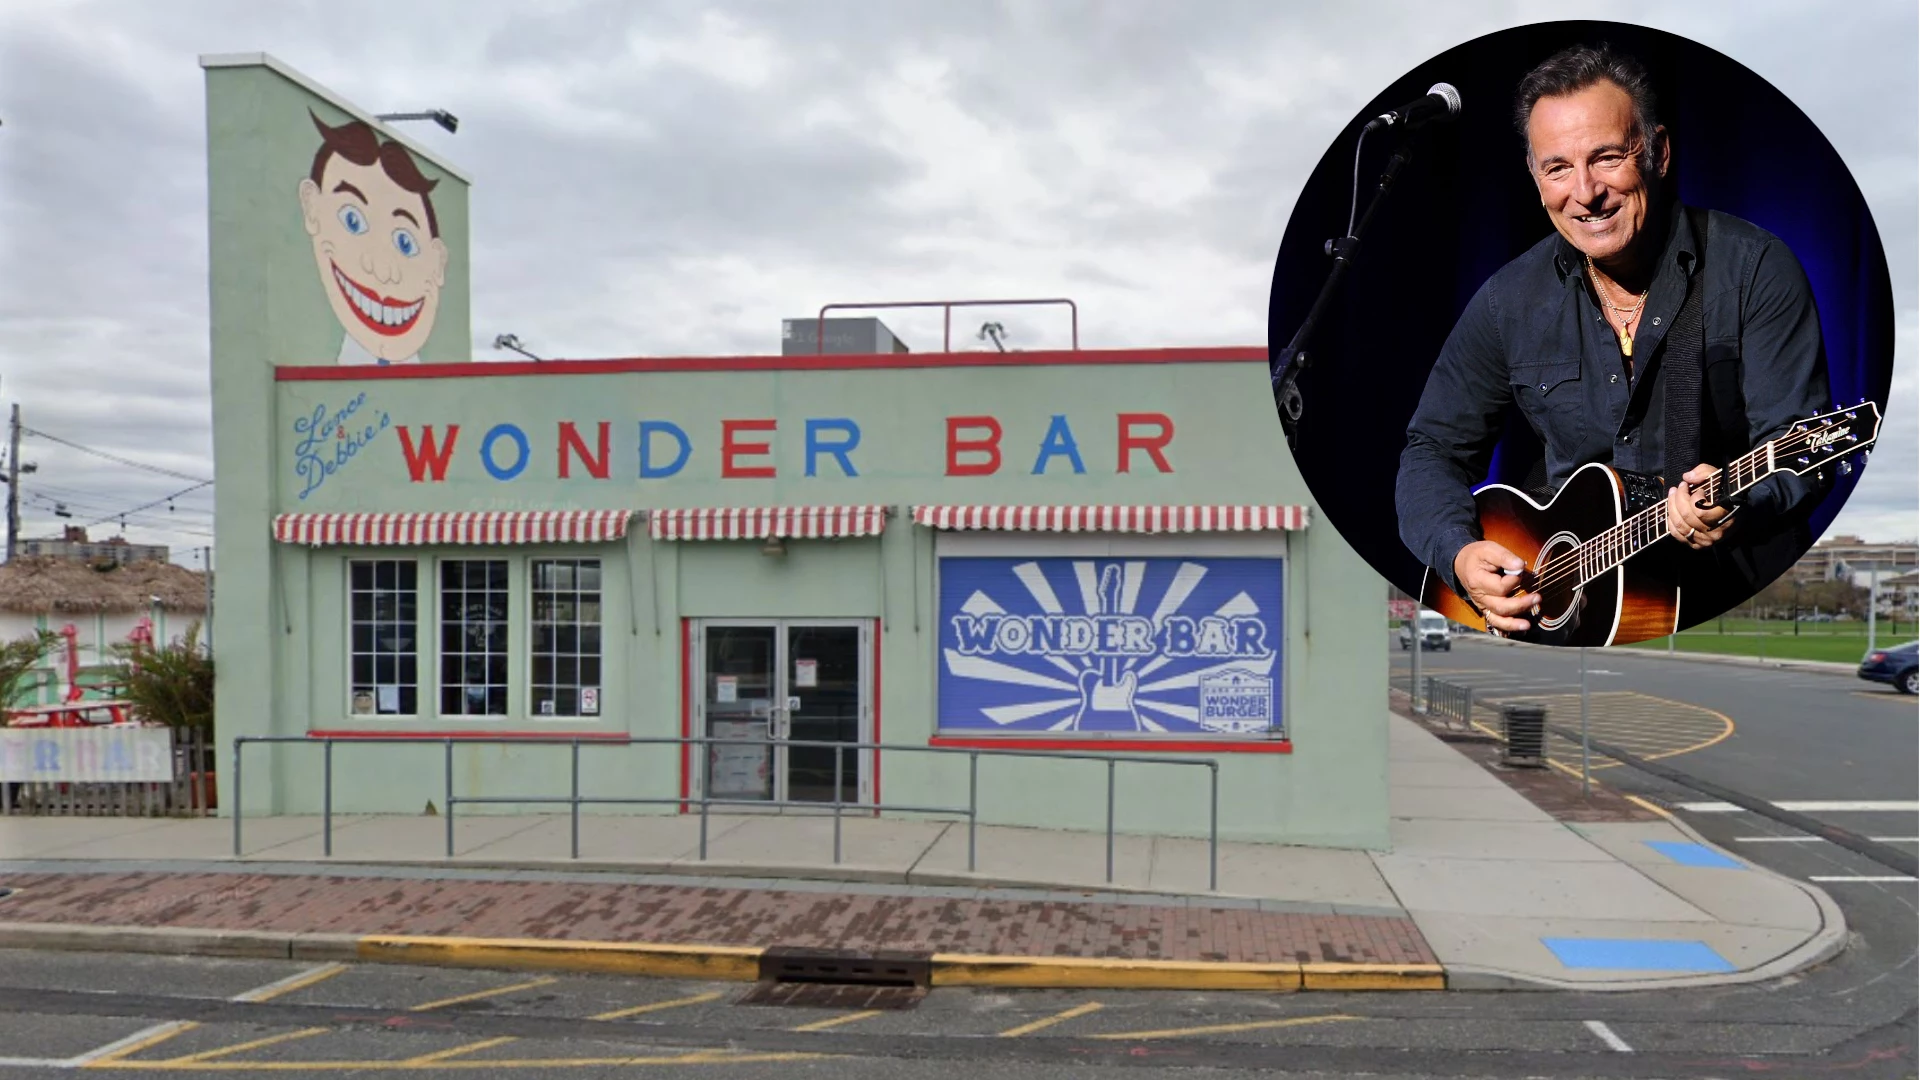 Springsteen stops by Wonder Bar for a special salute